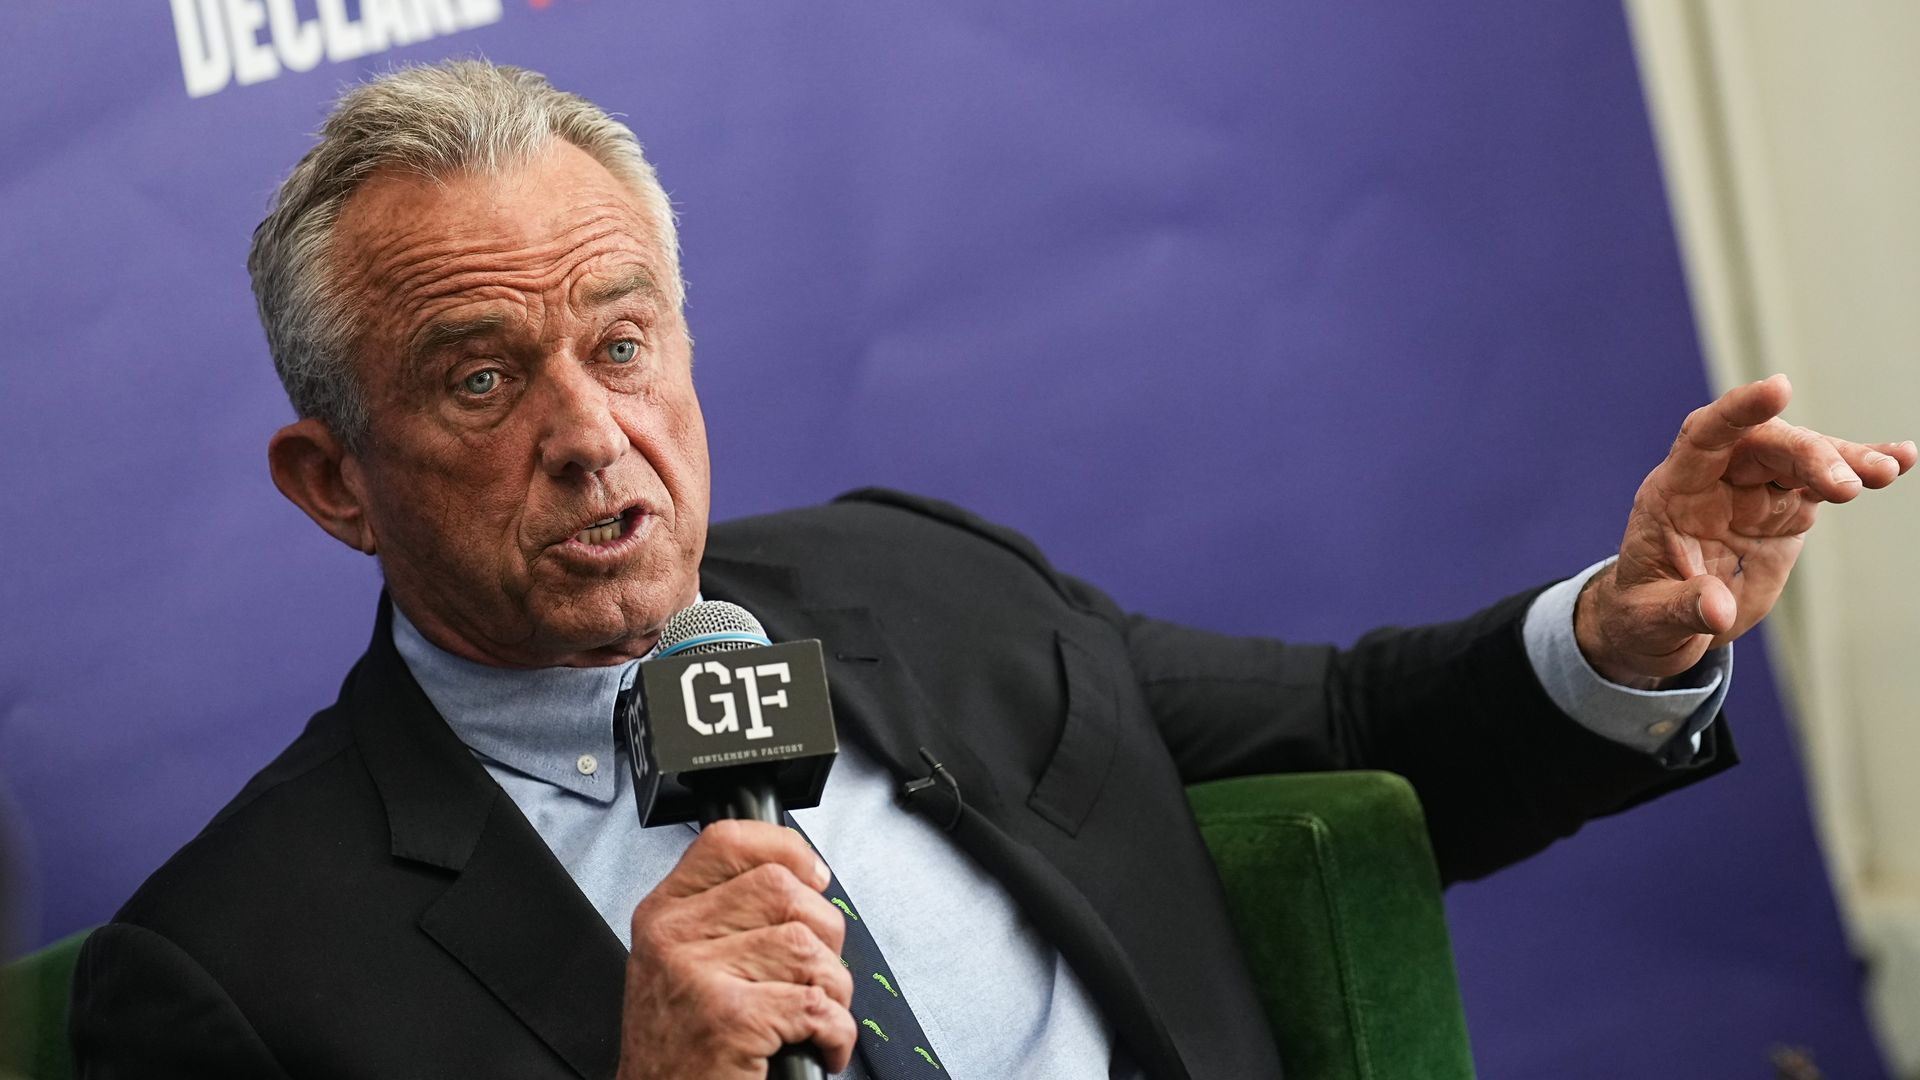 Robert F. Kennedy, Jr. hosts a fireside chat with rapper and producer Eric B. at The Gentleman's Factory on February 18, 2024 in New York City. (Photo by John Nacion/Getty Images)